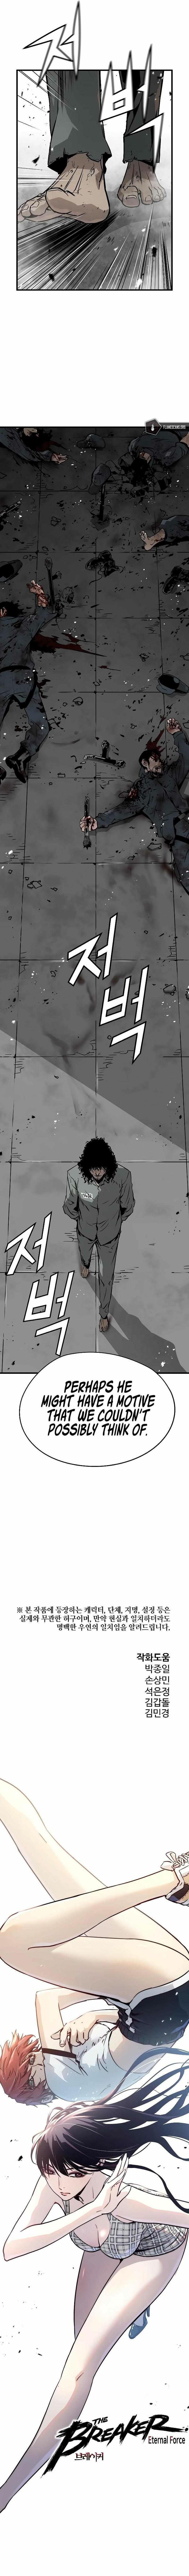 The Breaker: Eternal Force Chapter 66 page 12 - 